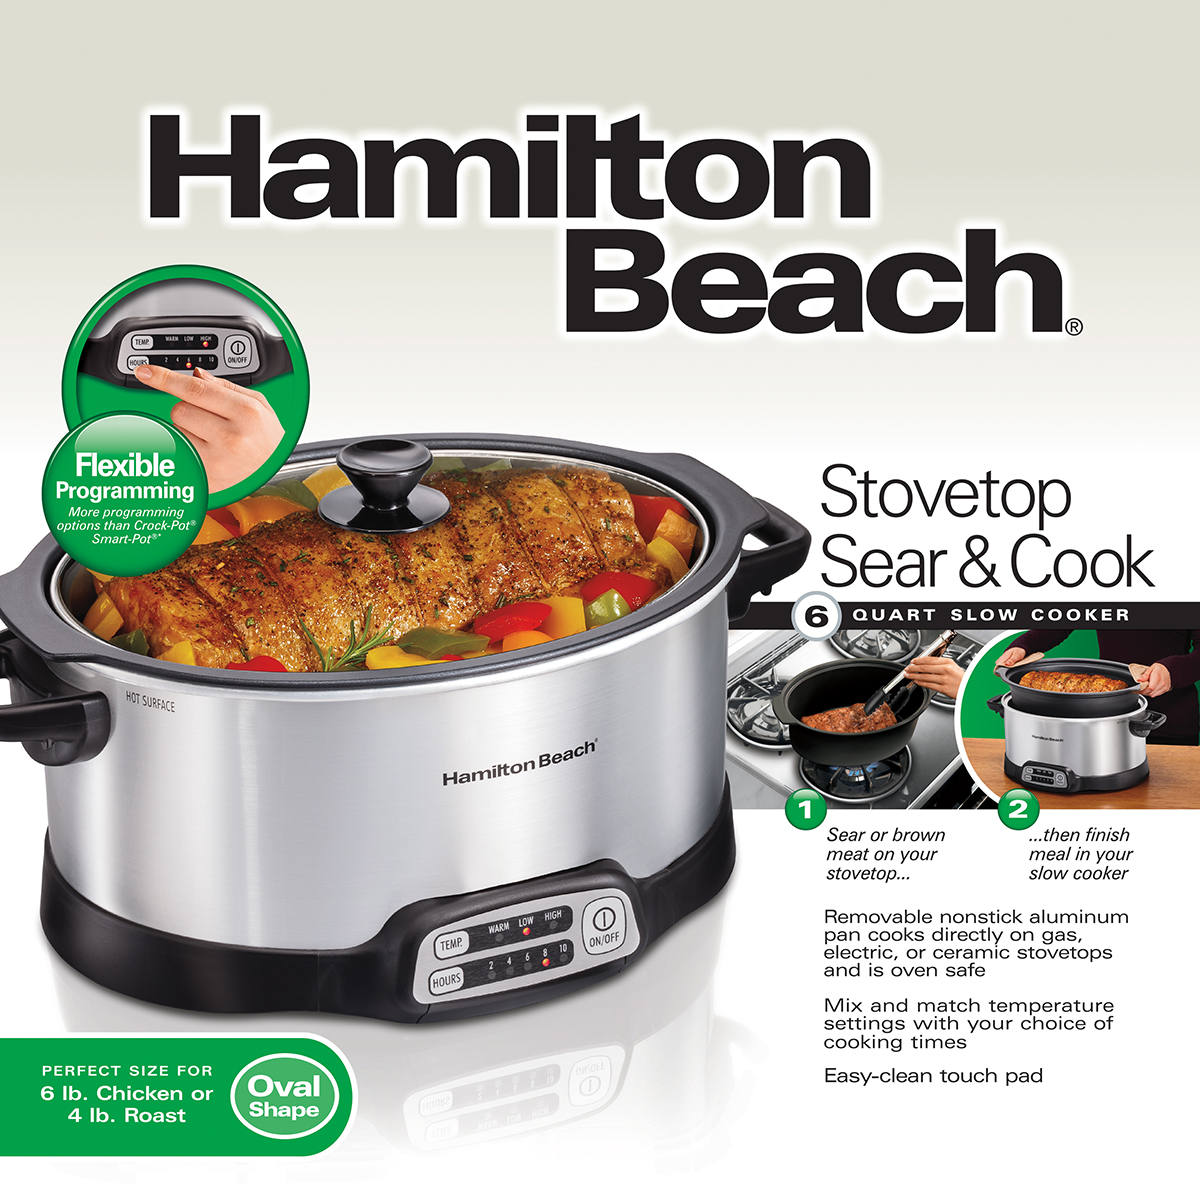 Hamilton Beach Sear & Cook Stock Pot Slow Cooker with Stovetop Safe Crock, Large 10 Quart Capacity, Programmable, Silver (33196)